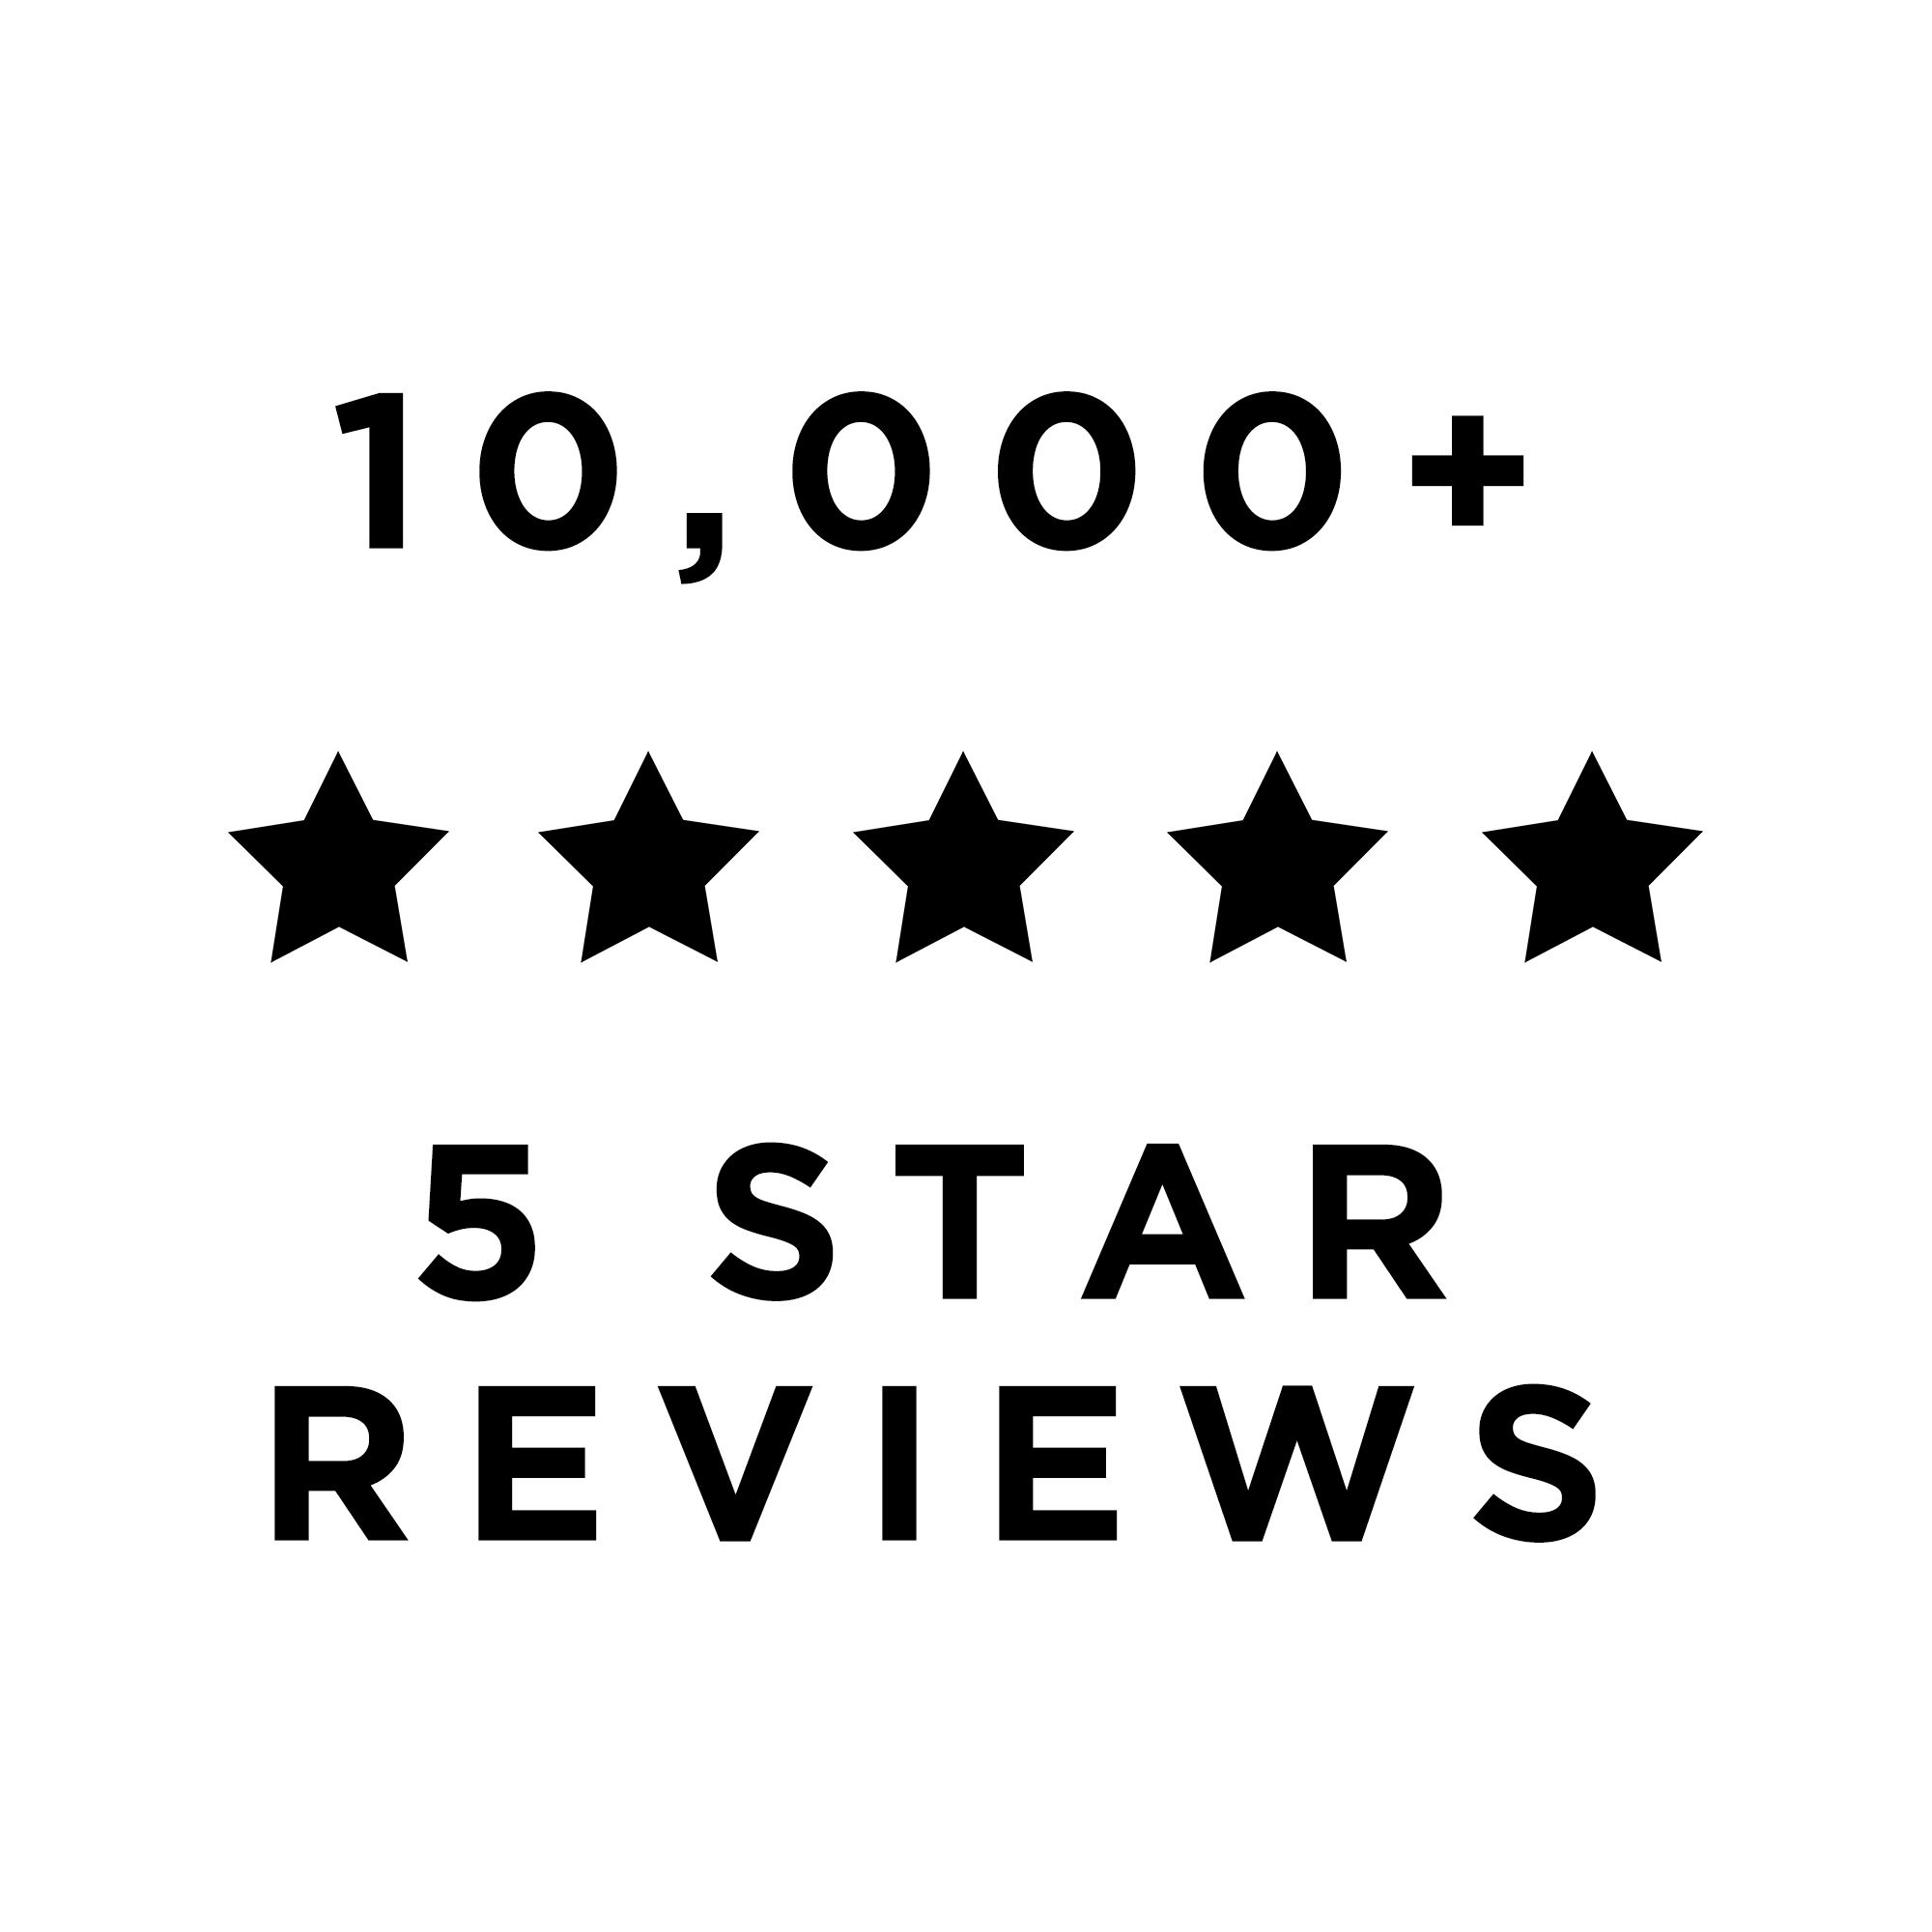 Over 10,000 five star reviews!